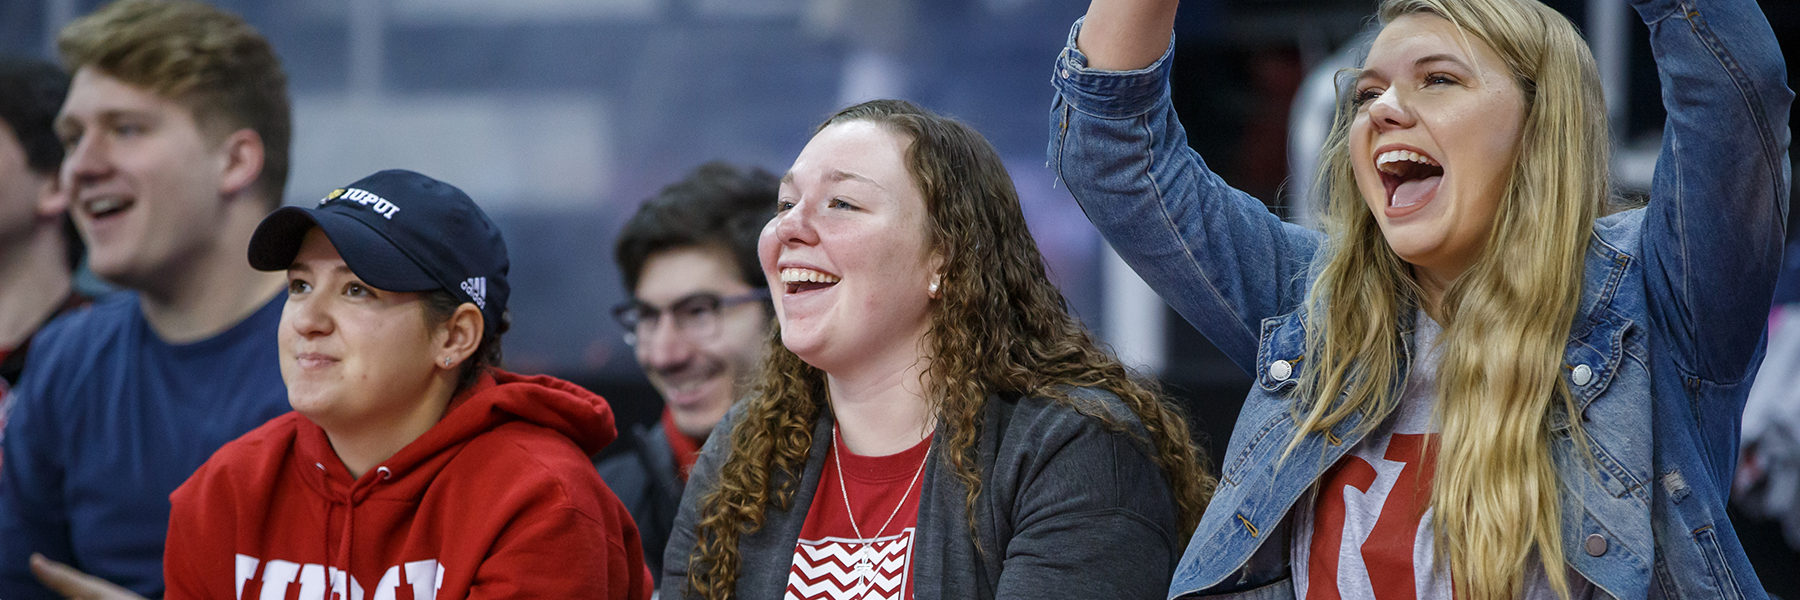 Students cheering at an IUPUI sporting event.